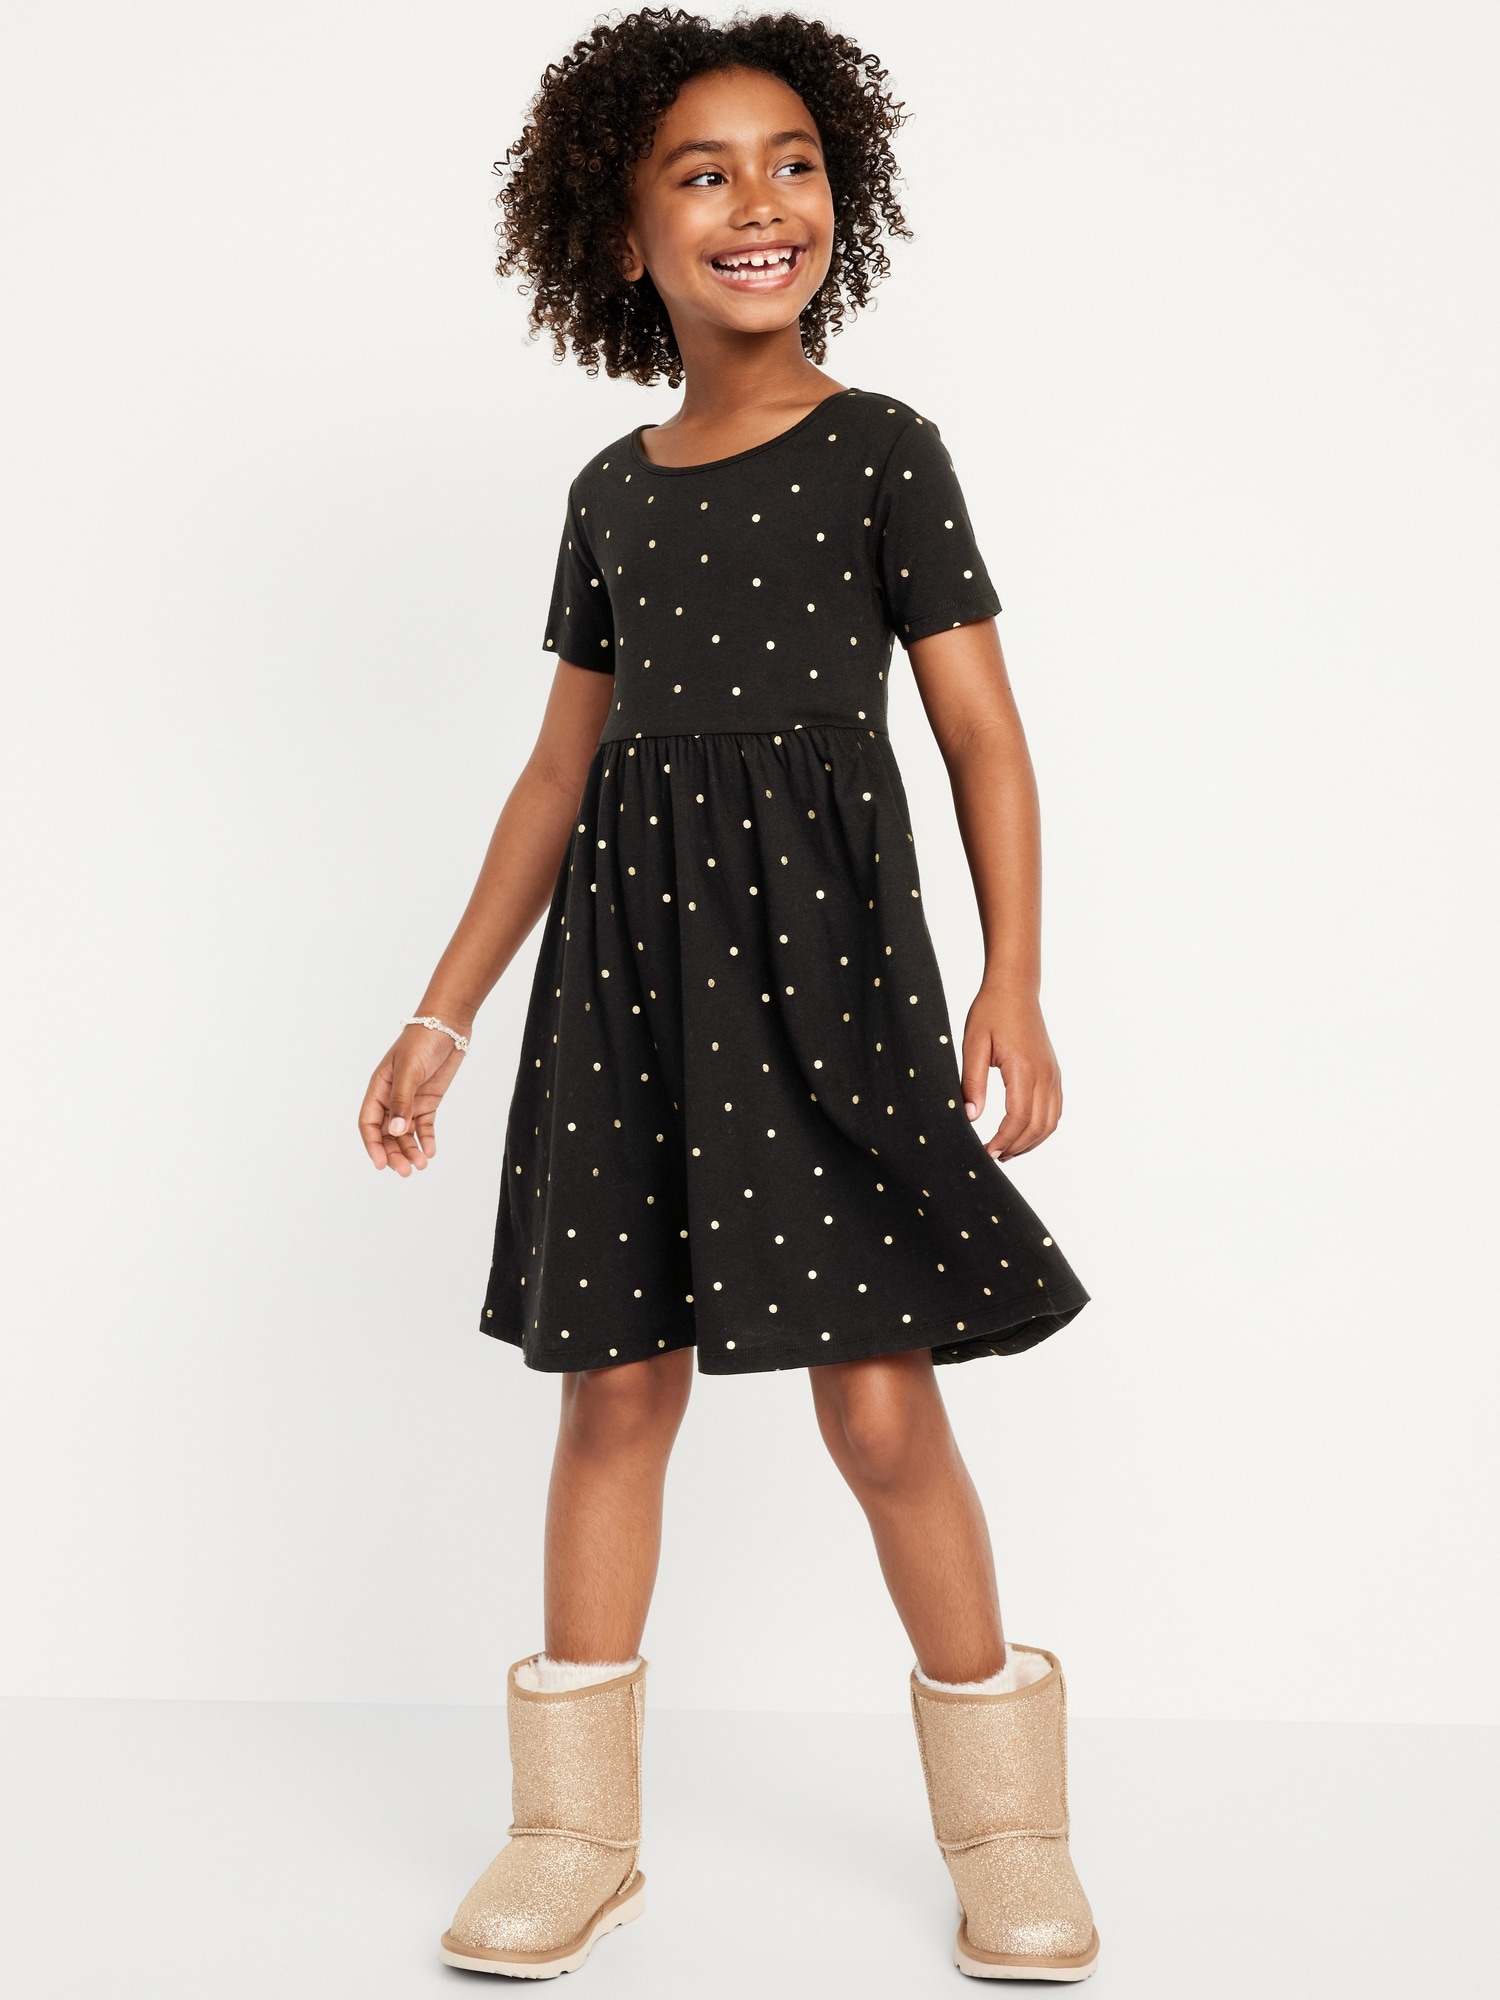 Printed Short-Sleeve Fit & Flare Dress for Girls | Old Navy